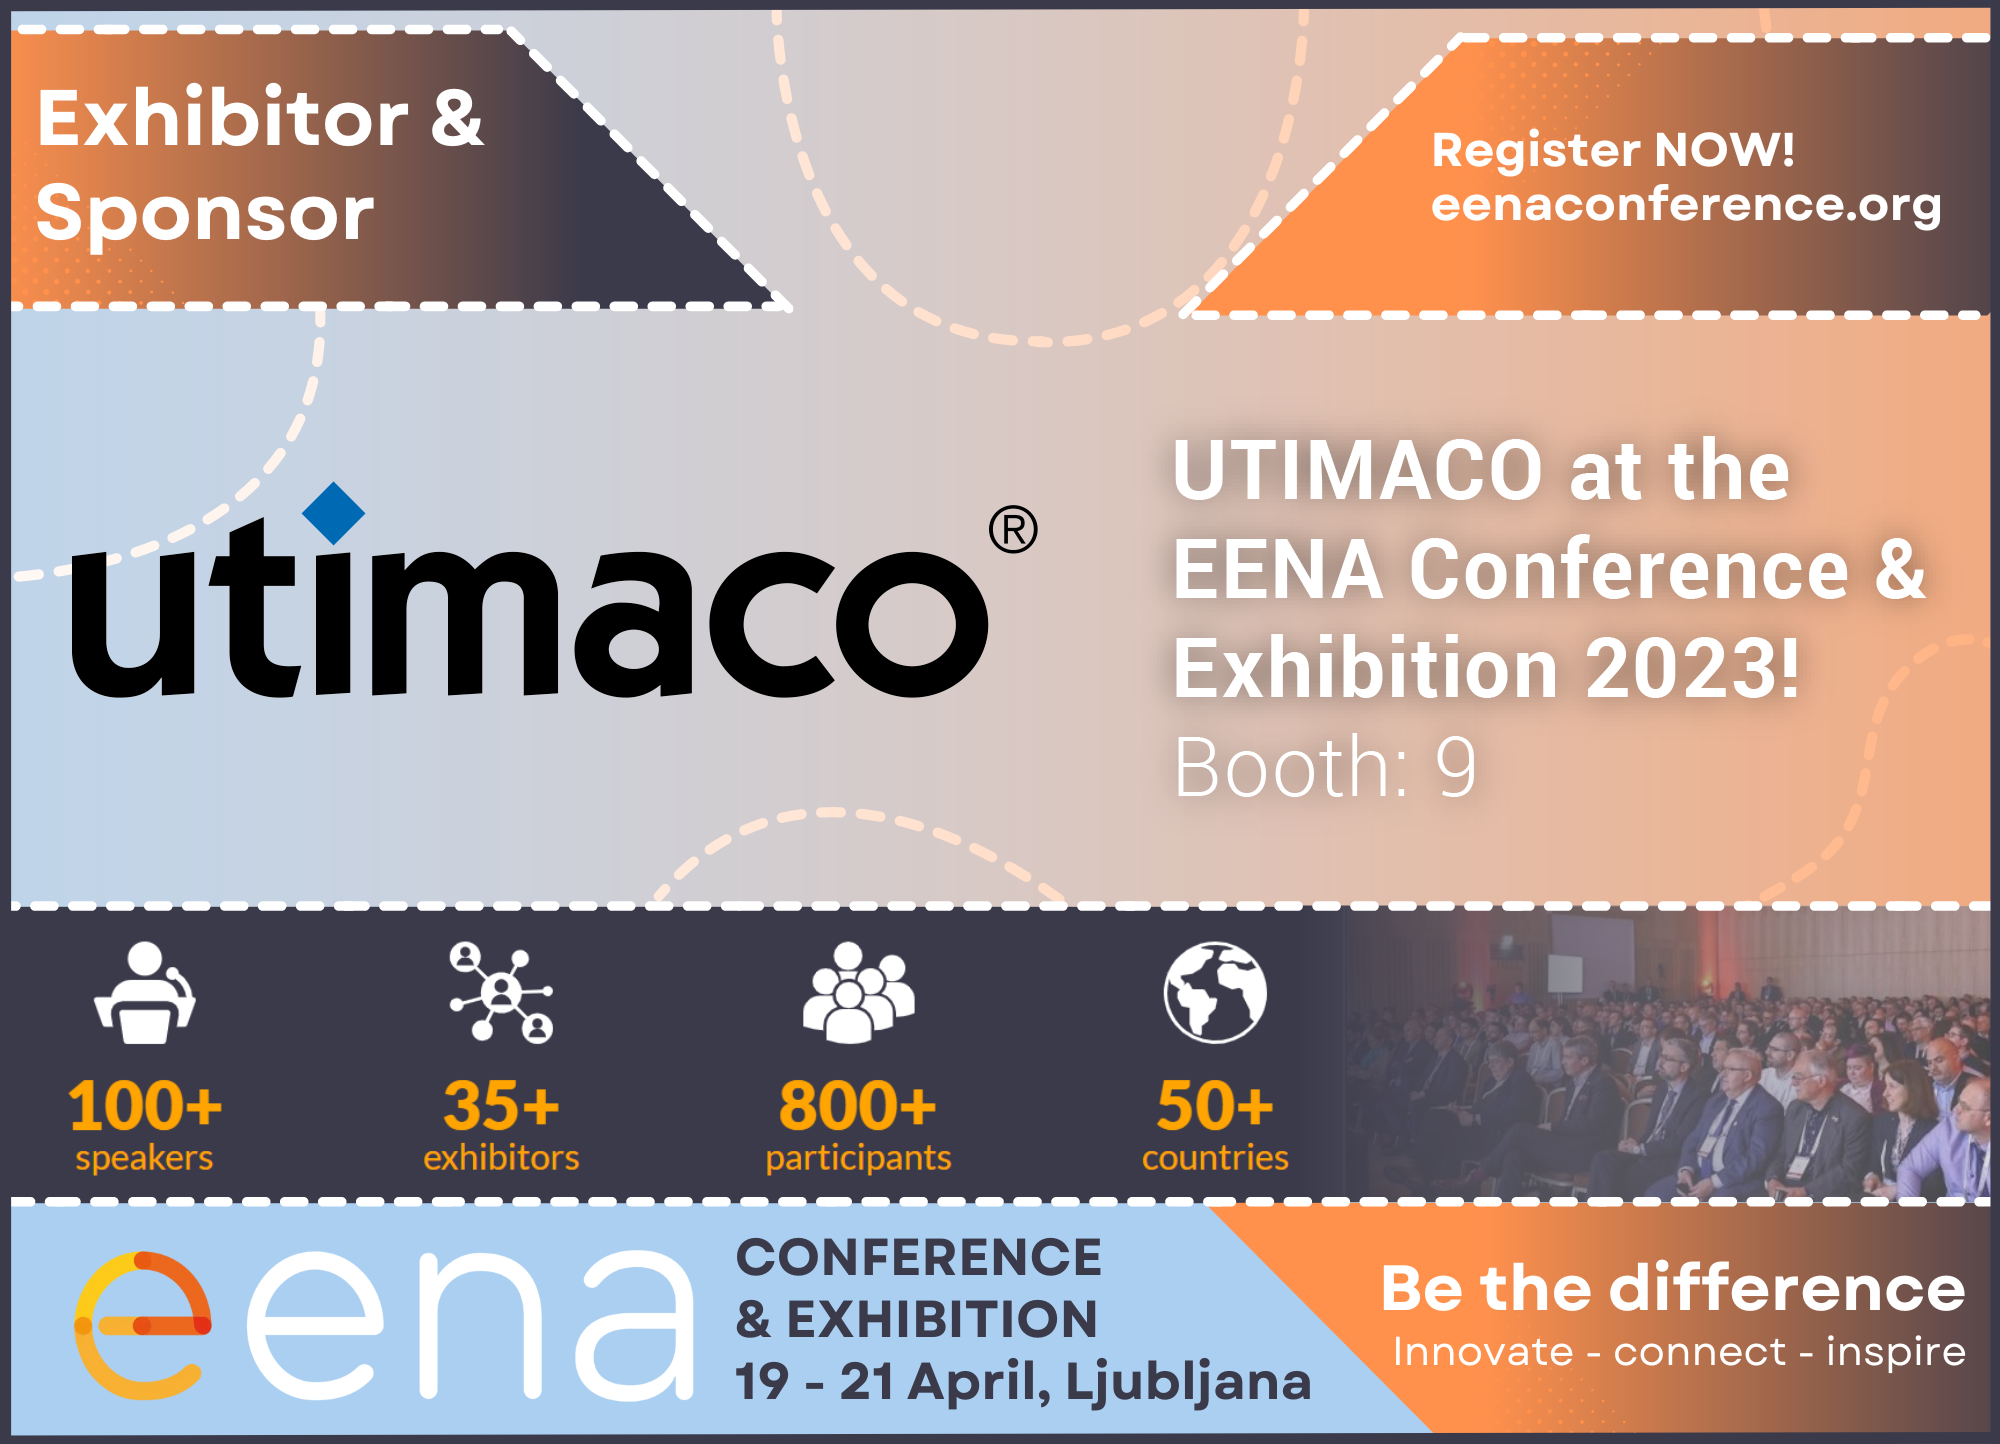 utimaco at the EENA Conference